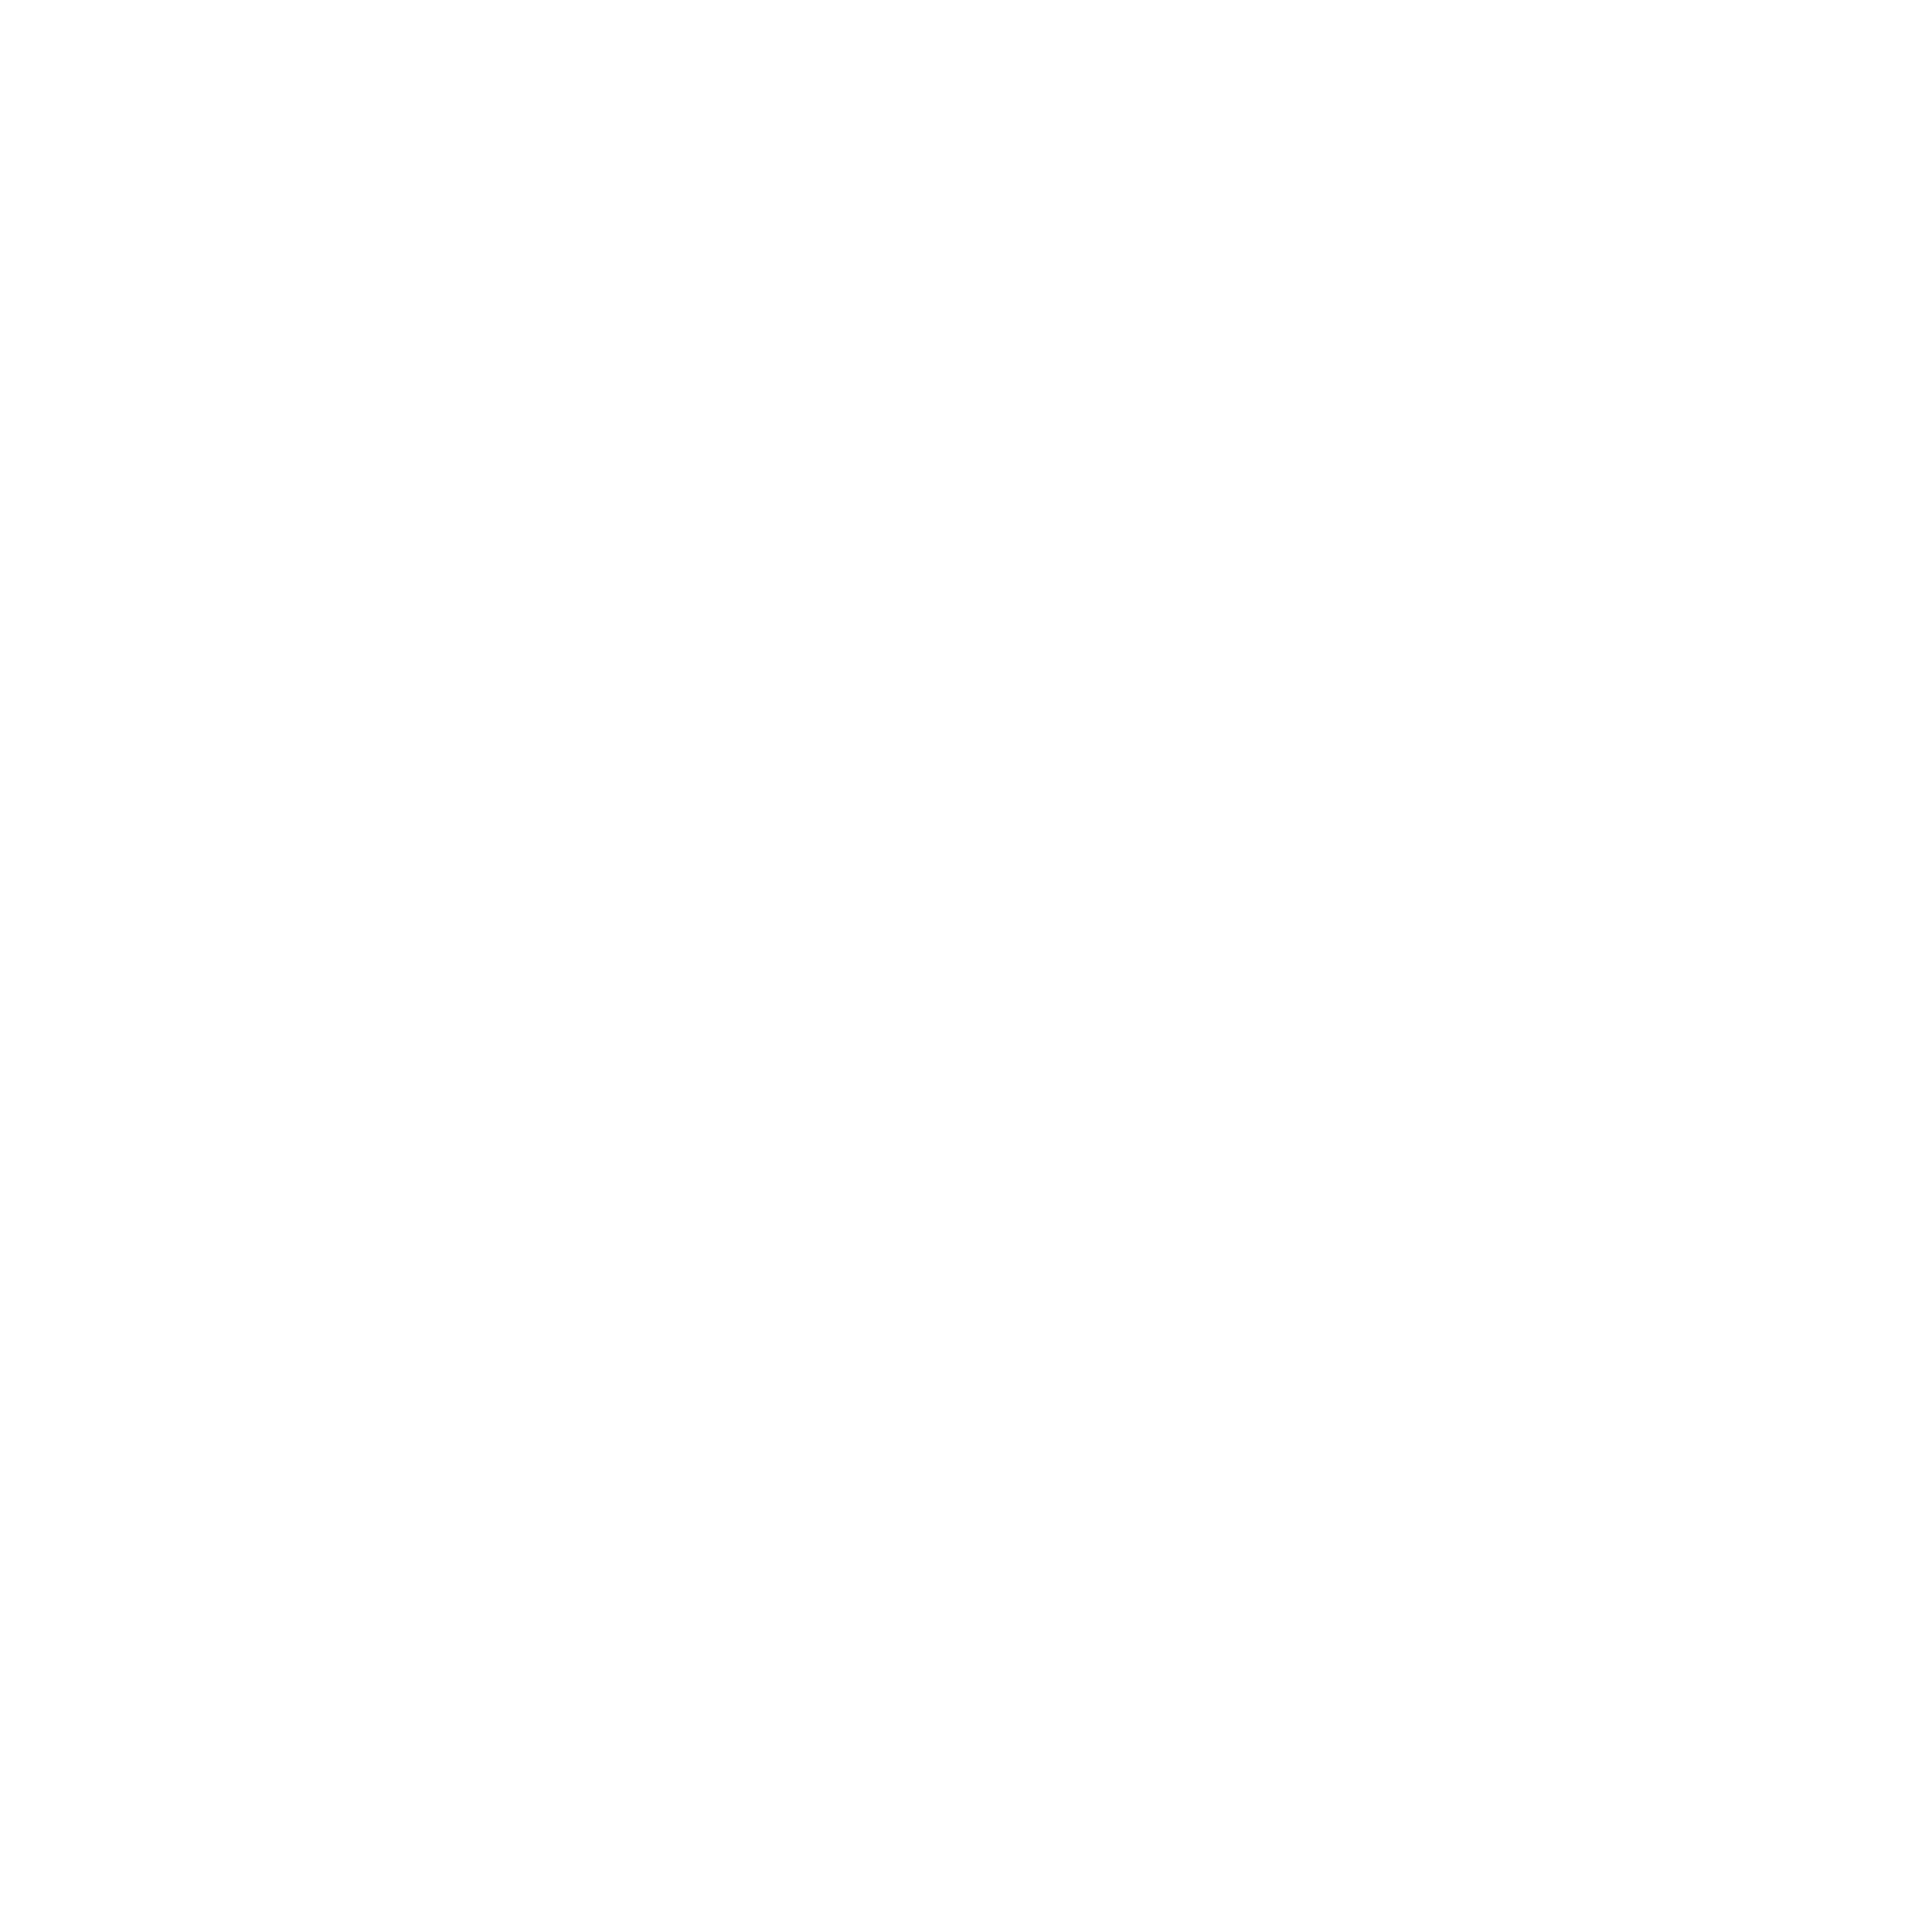 Mike Wehbe Real Estate